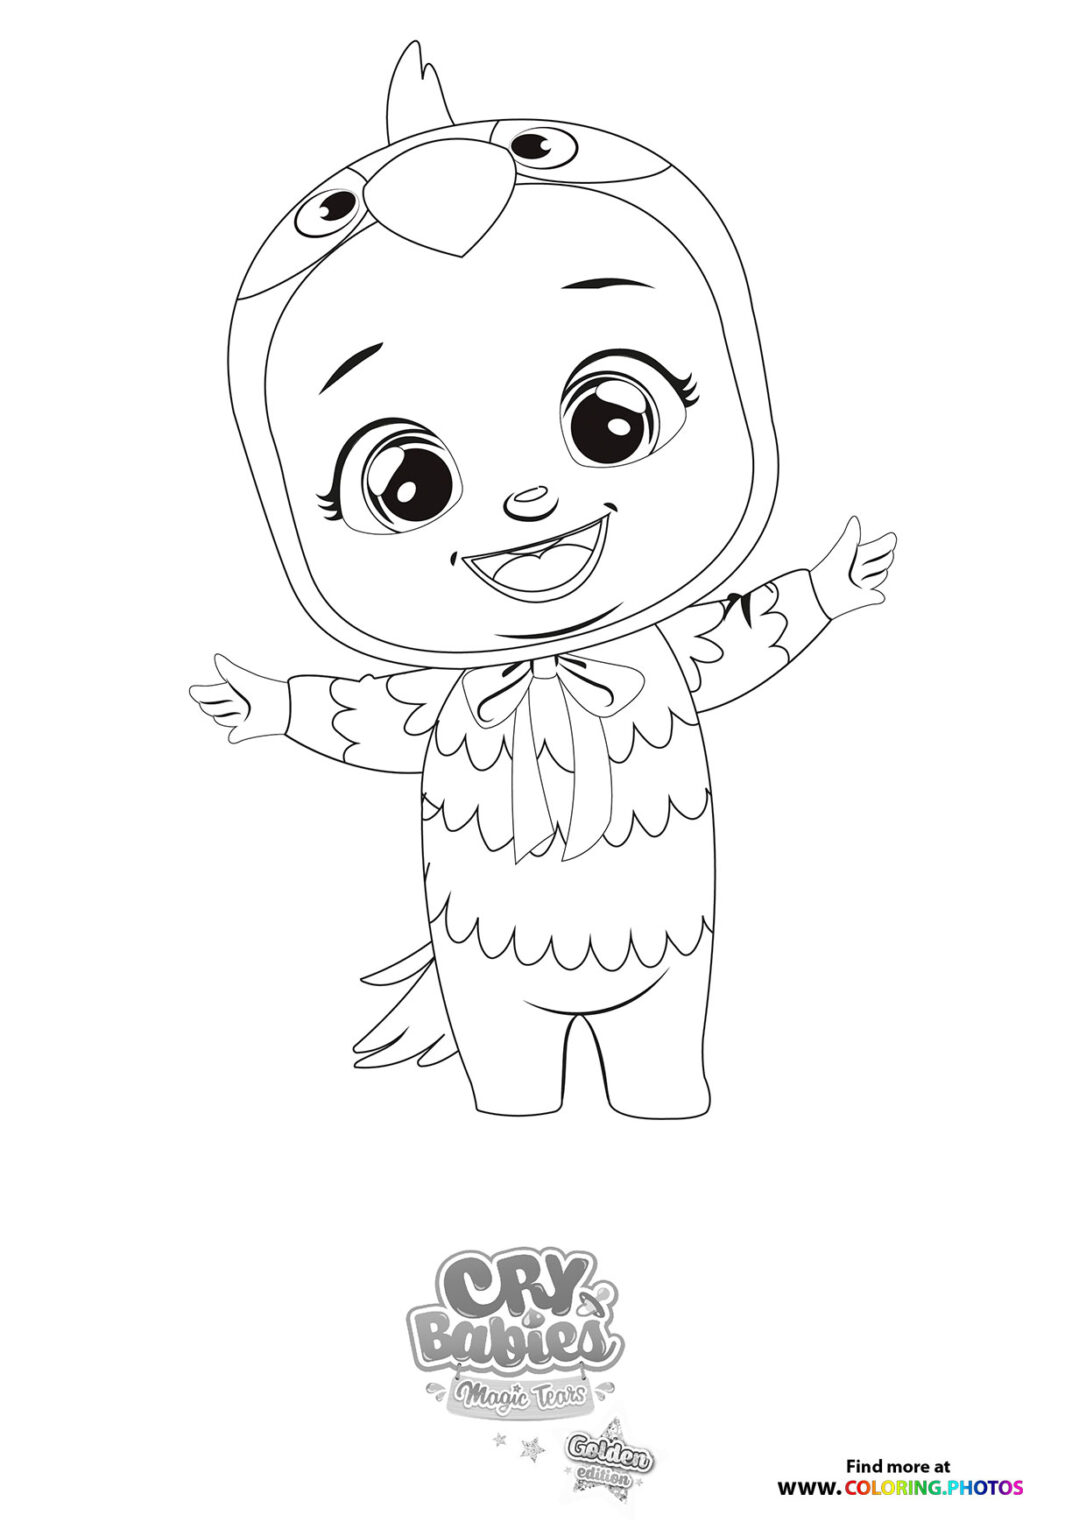 Cry Babies - Gold Edition - Coloring Pages for kids | Free and easy print